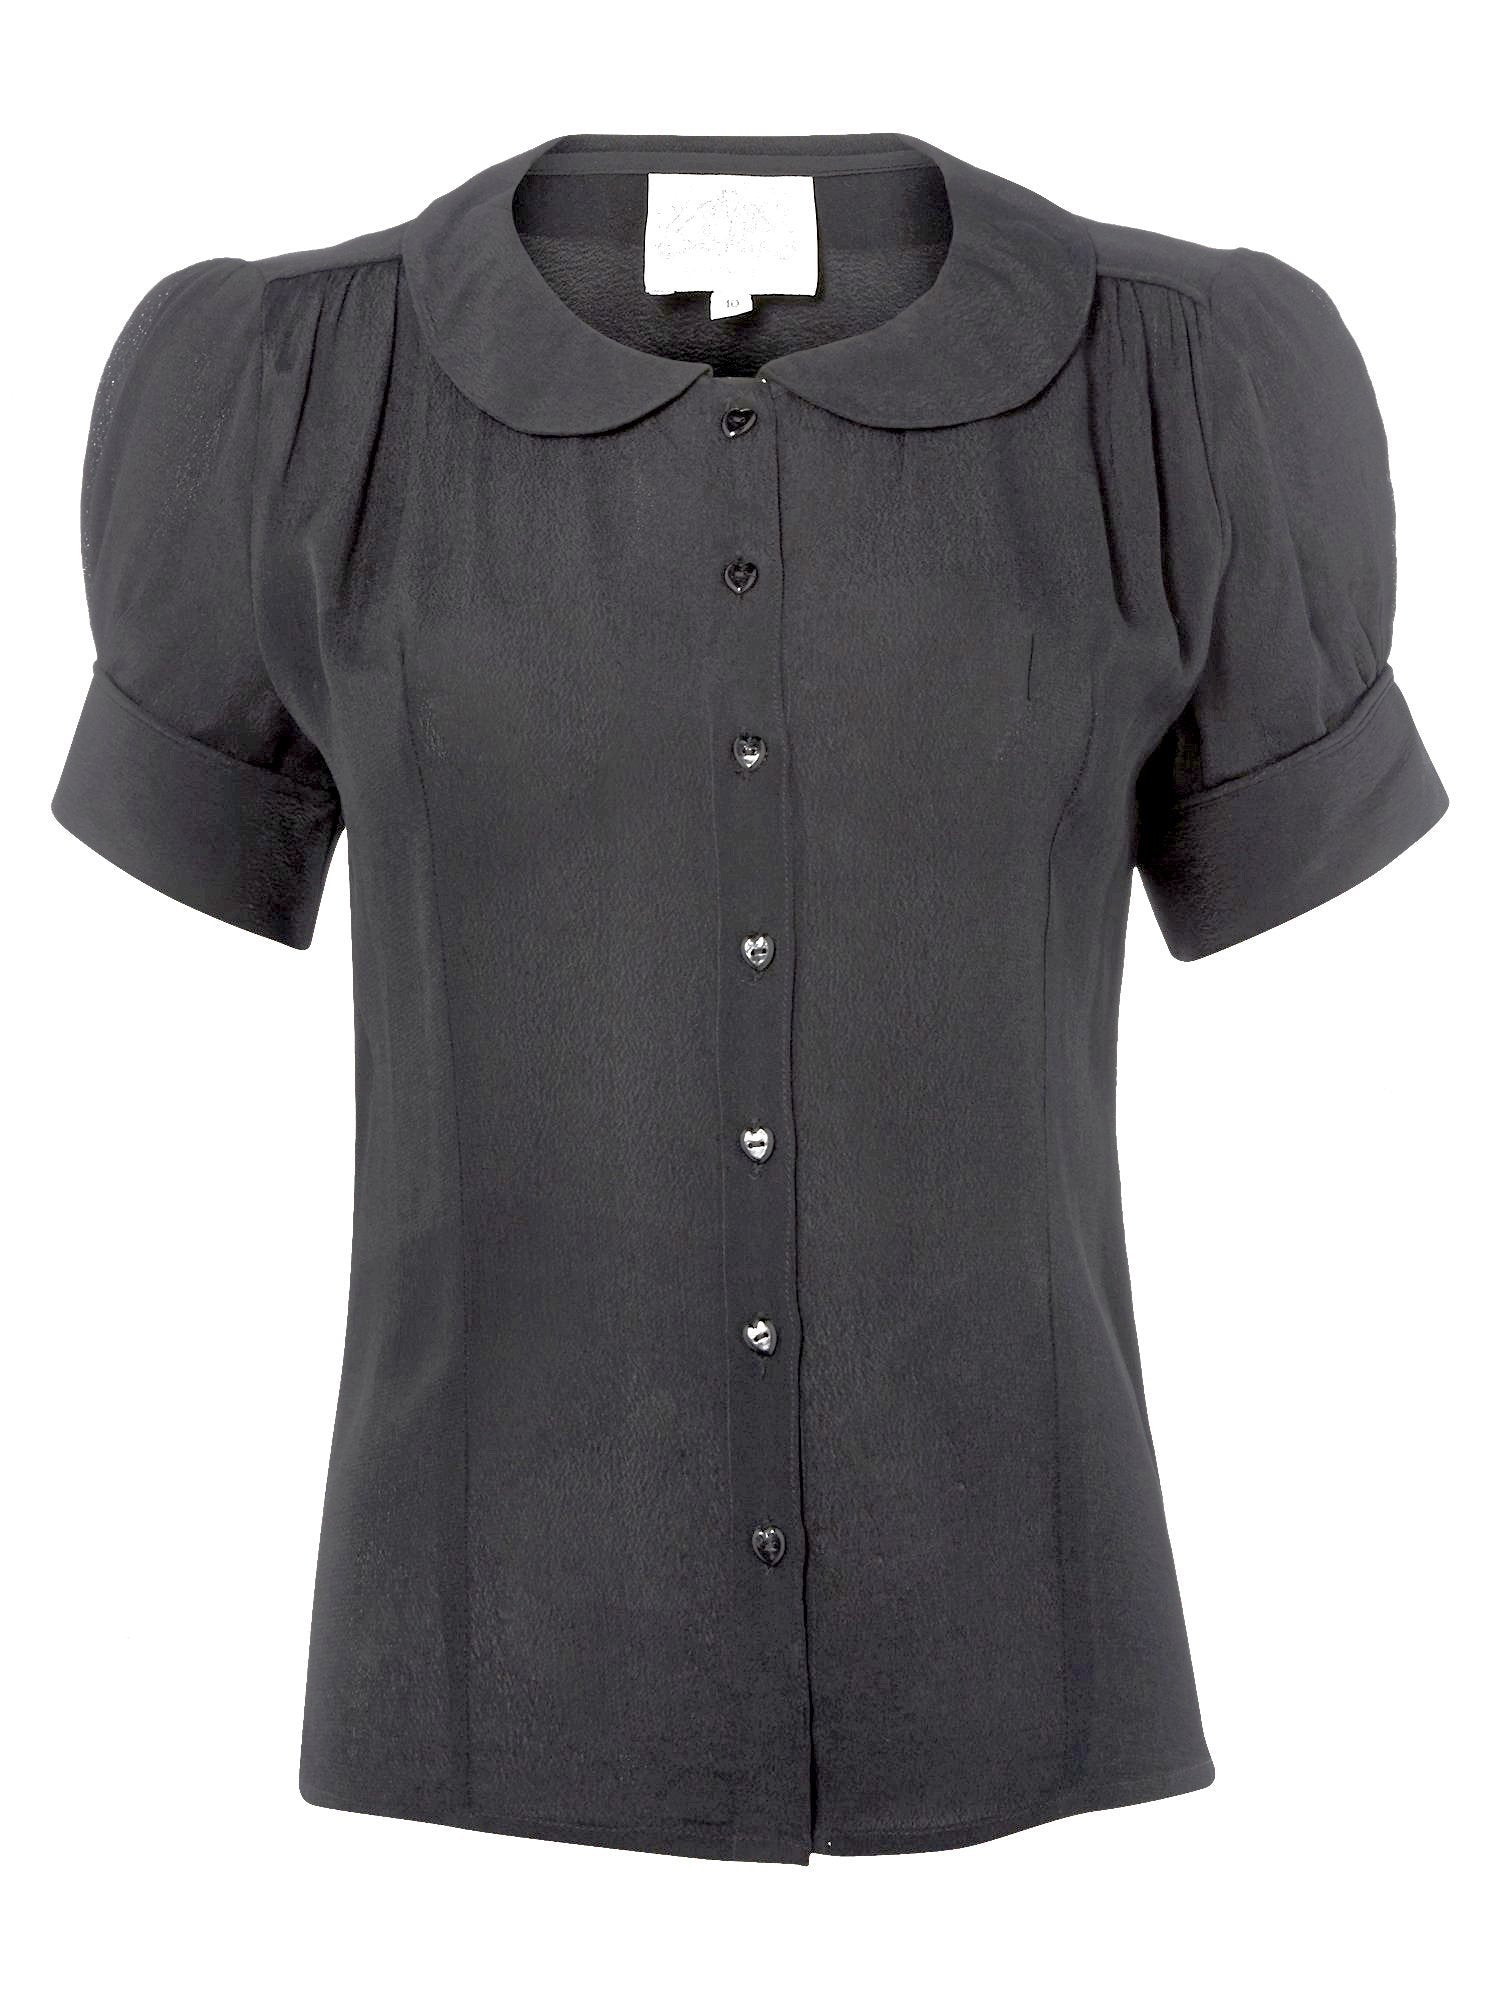 "Jive" Short Sleeve Blouse in Black, Classic 1940s Vintage Style - True and authentic vintage style clothing, inspired by the Classic styles of CC41 , WW2 and the fun 1950s RocknRoll era, for everyday wear plus events like Goodwood Revival, Twinwood Festival and Viva Las Vegas Rockabilly Weekend Rock n Romance The Seamstress Of Bloomsbury